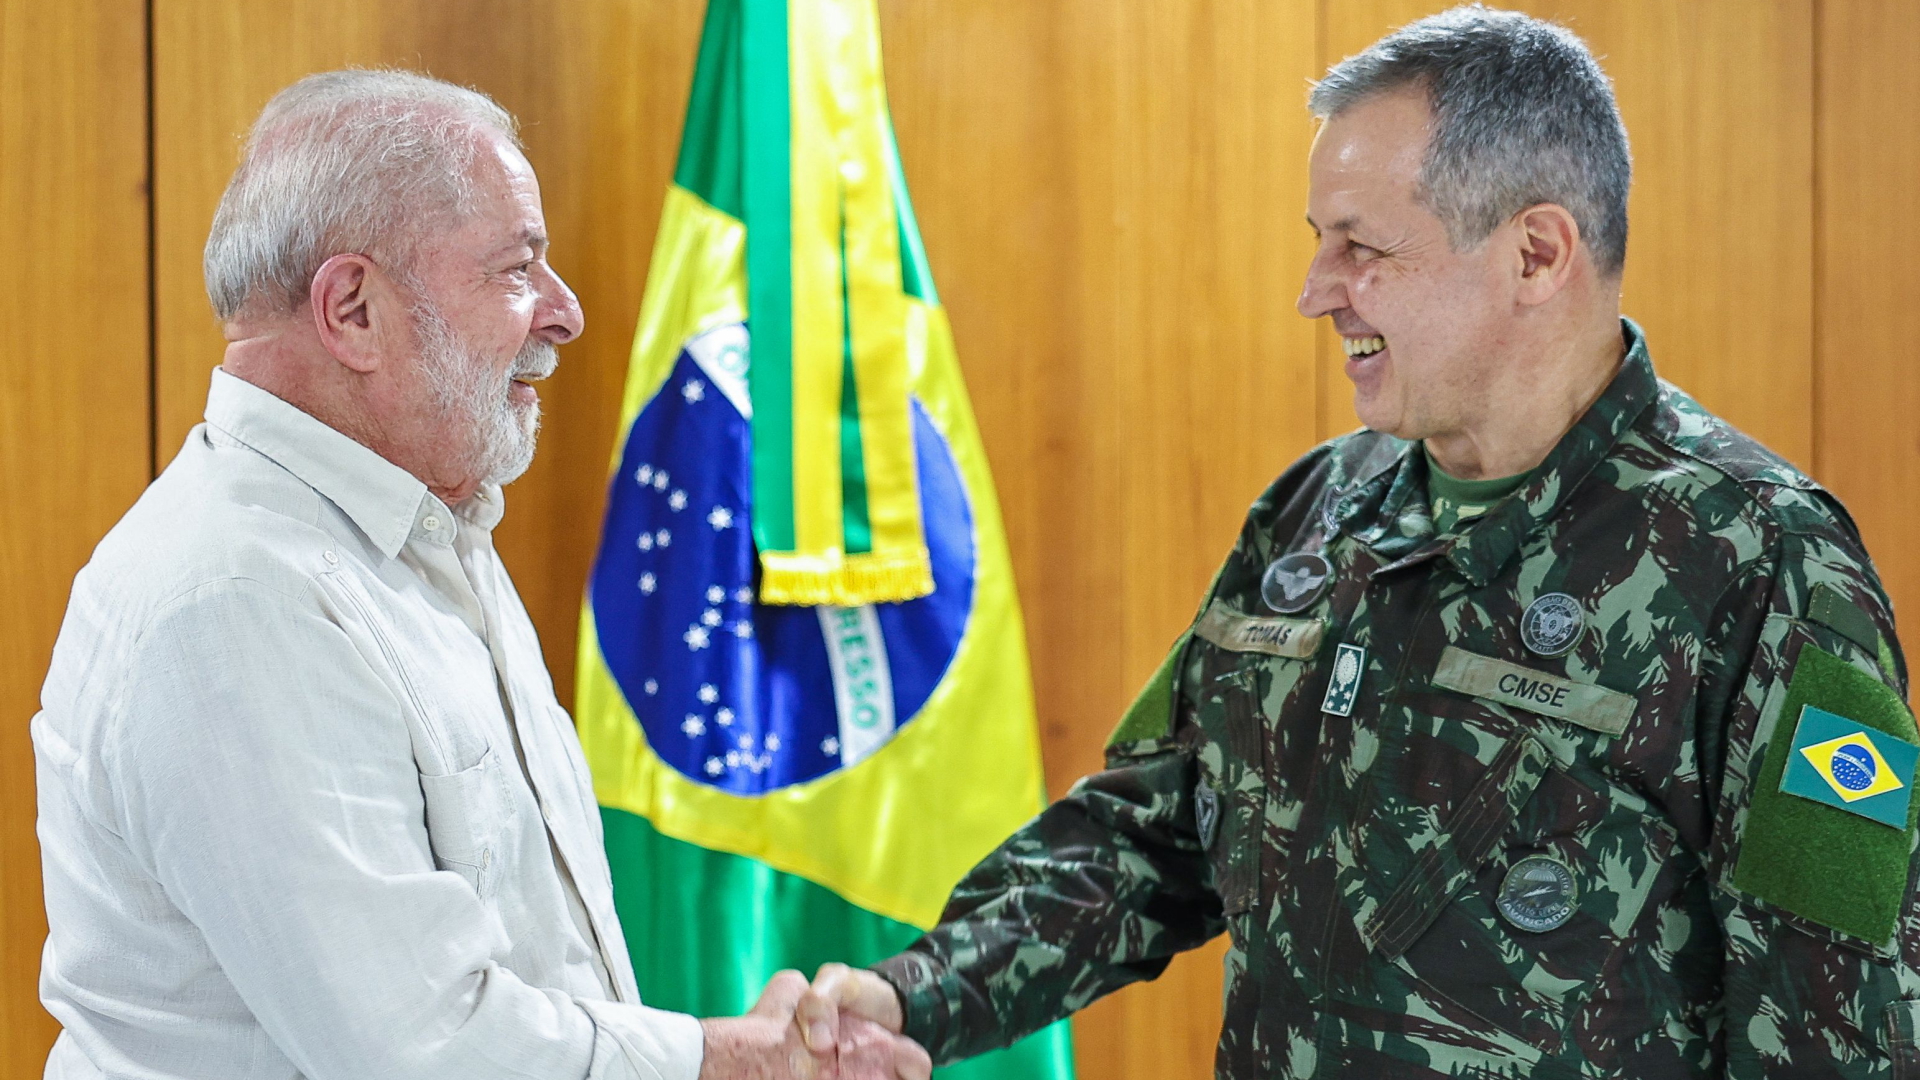 After the riots in Brazil: Lula fills the head of the army